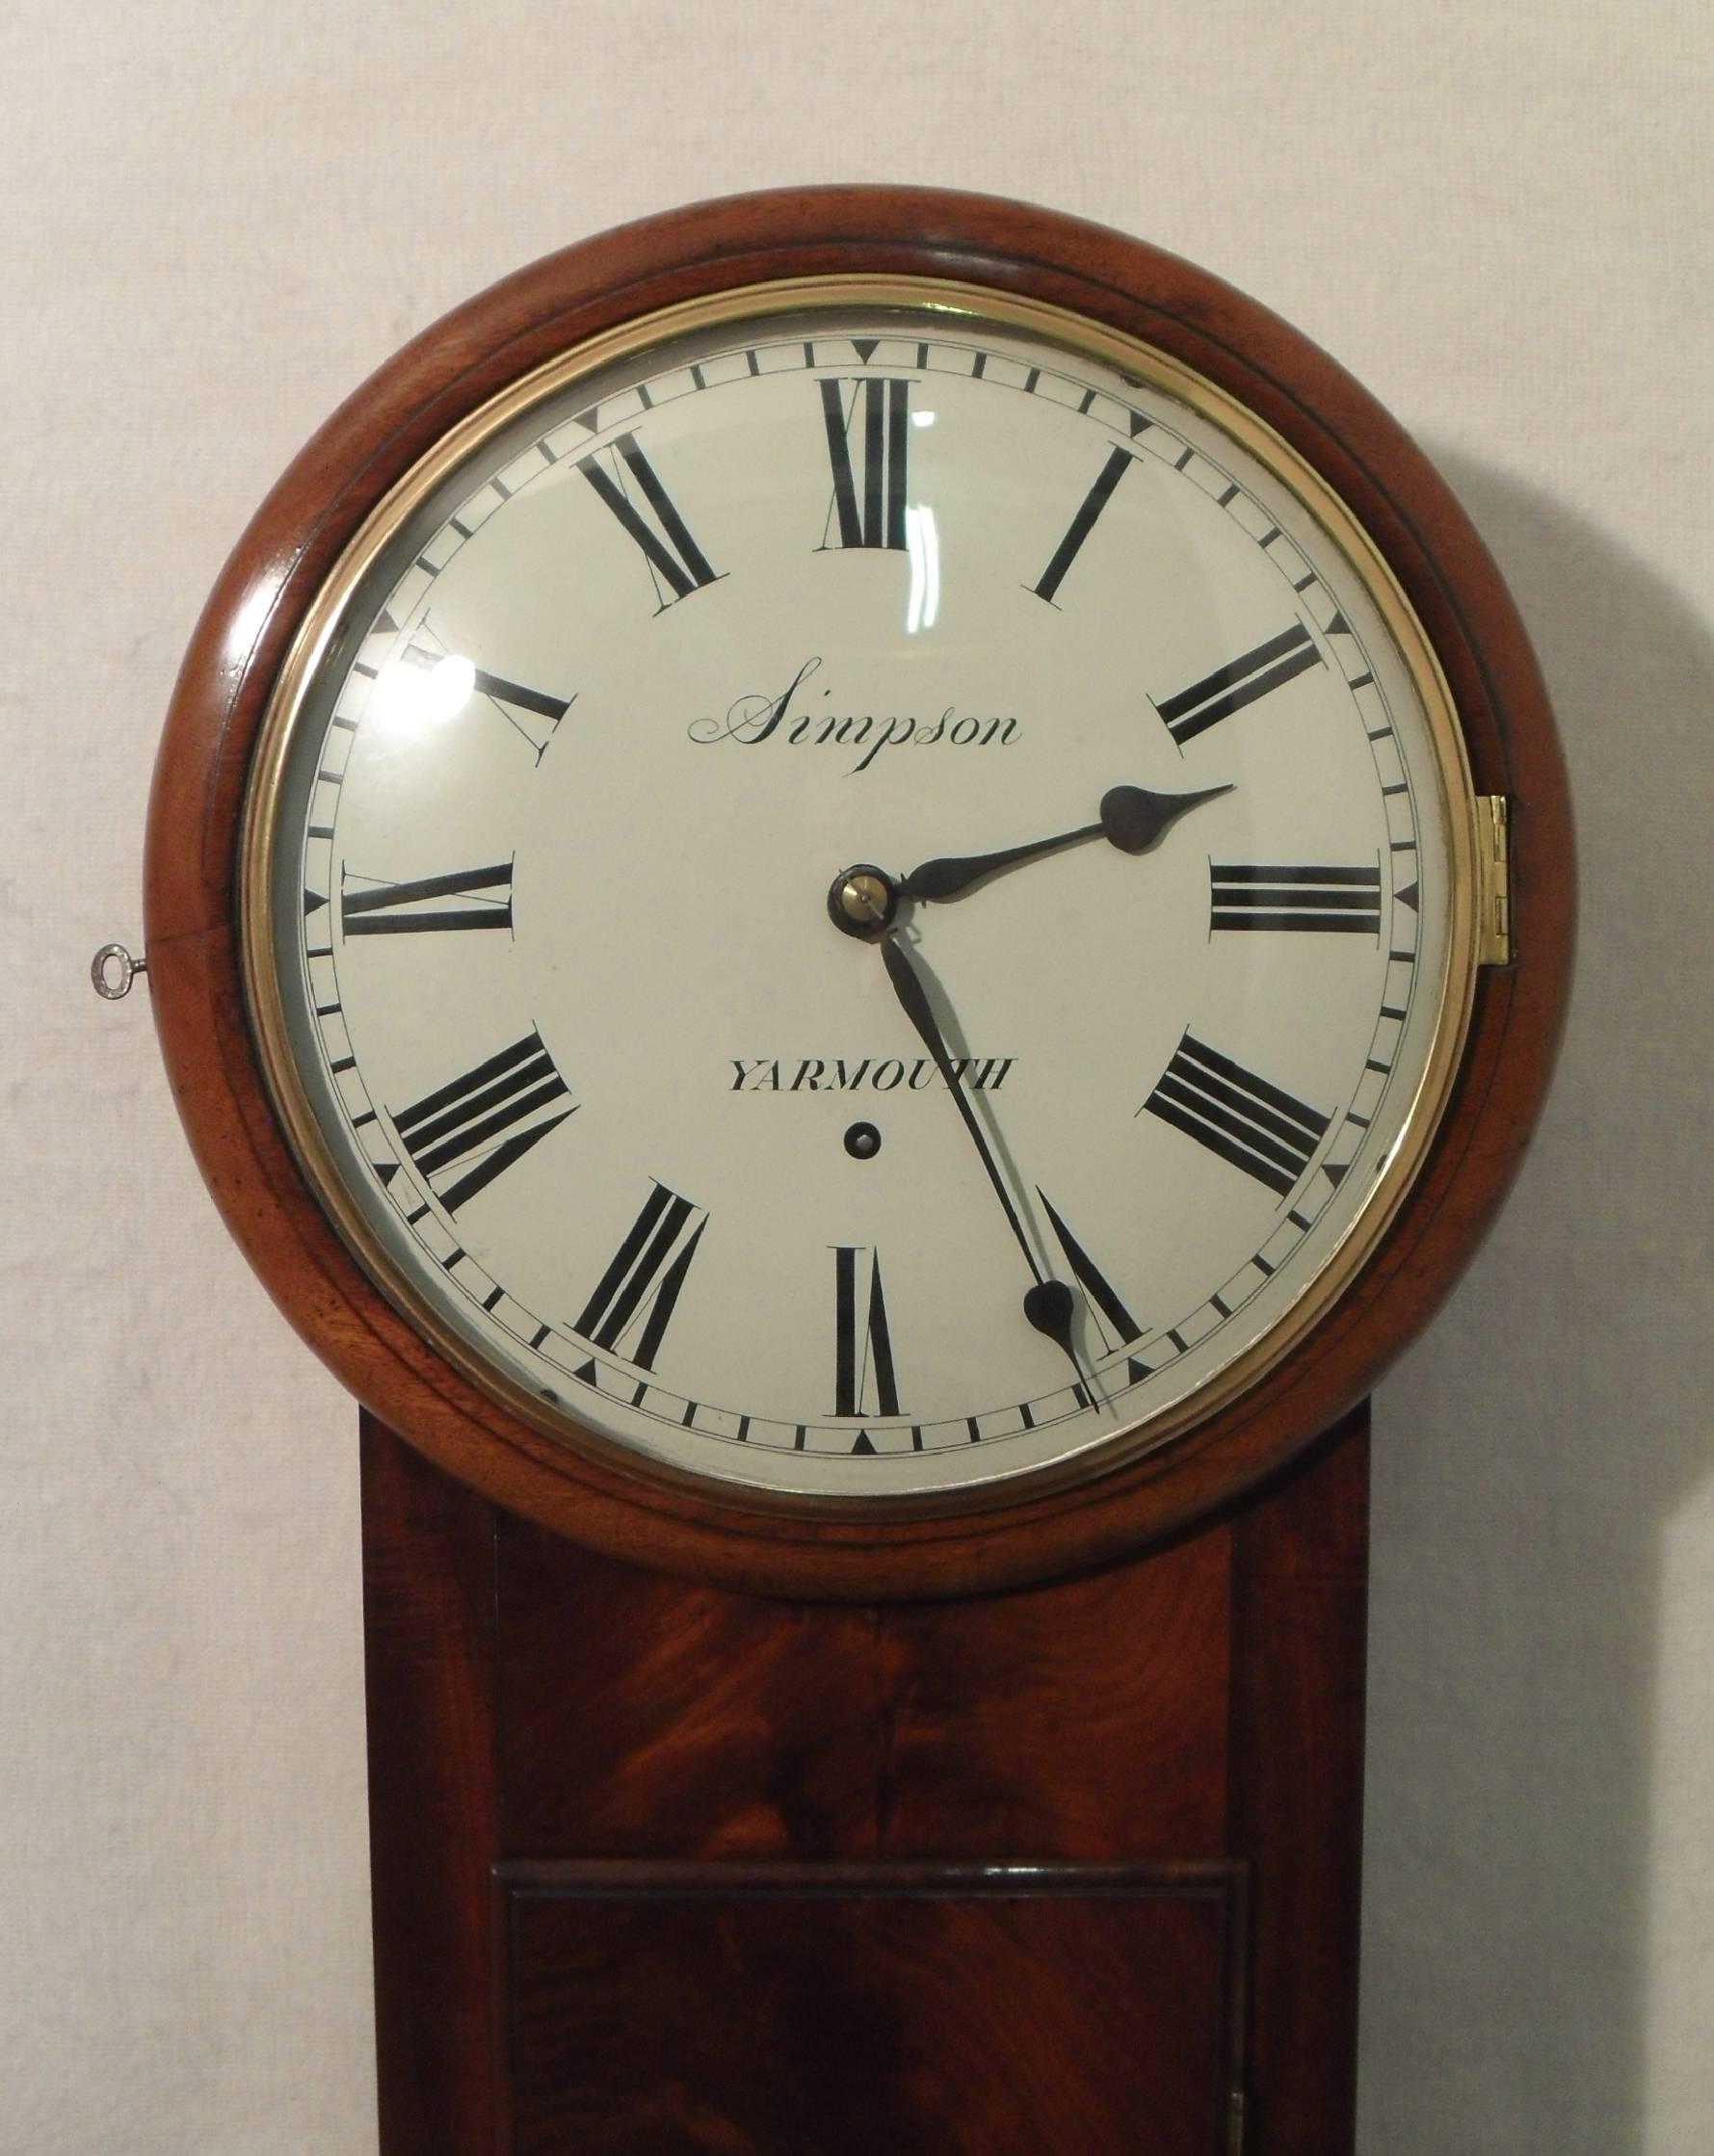 ​A superb quality figured mahogany George IV Norfolk wall clock timepiece with a weight driven eight day movement, anchor escapement and anti clockwise winding mechanism with  'A' shaped front and back plates to the movement.

The clock has a 12